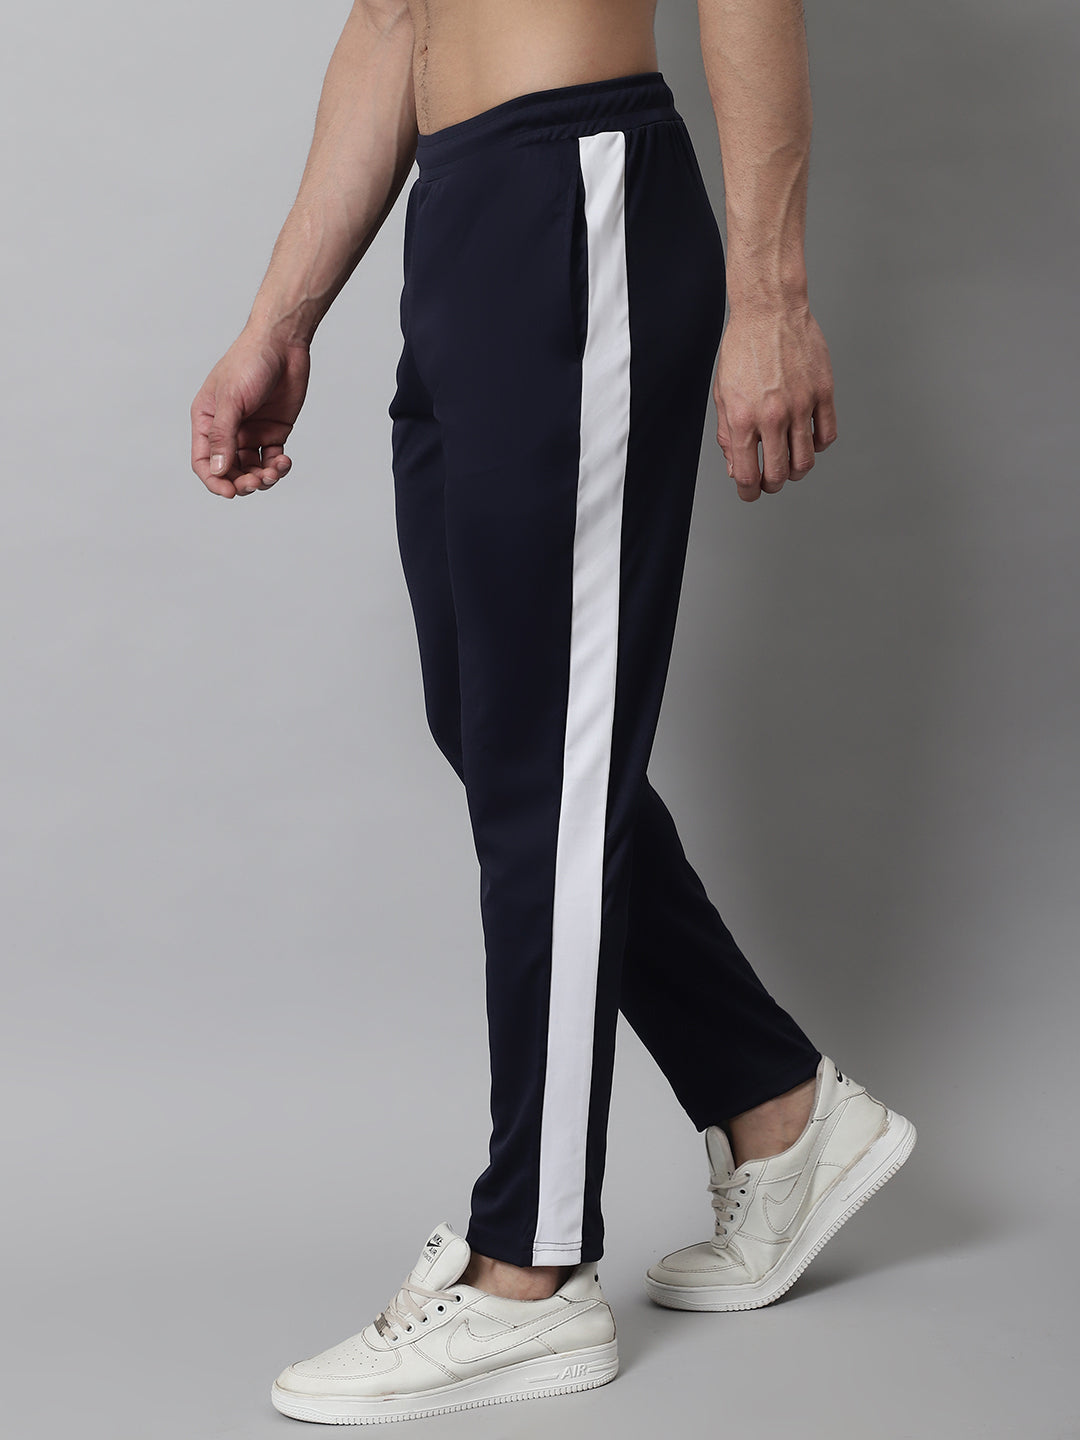 Men's Navy Blue and White Striped Streachable Lycra Trackpants